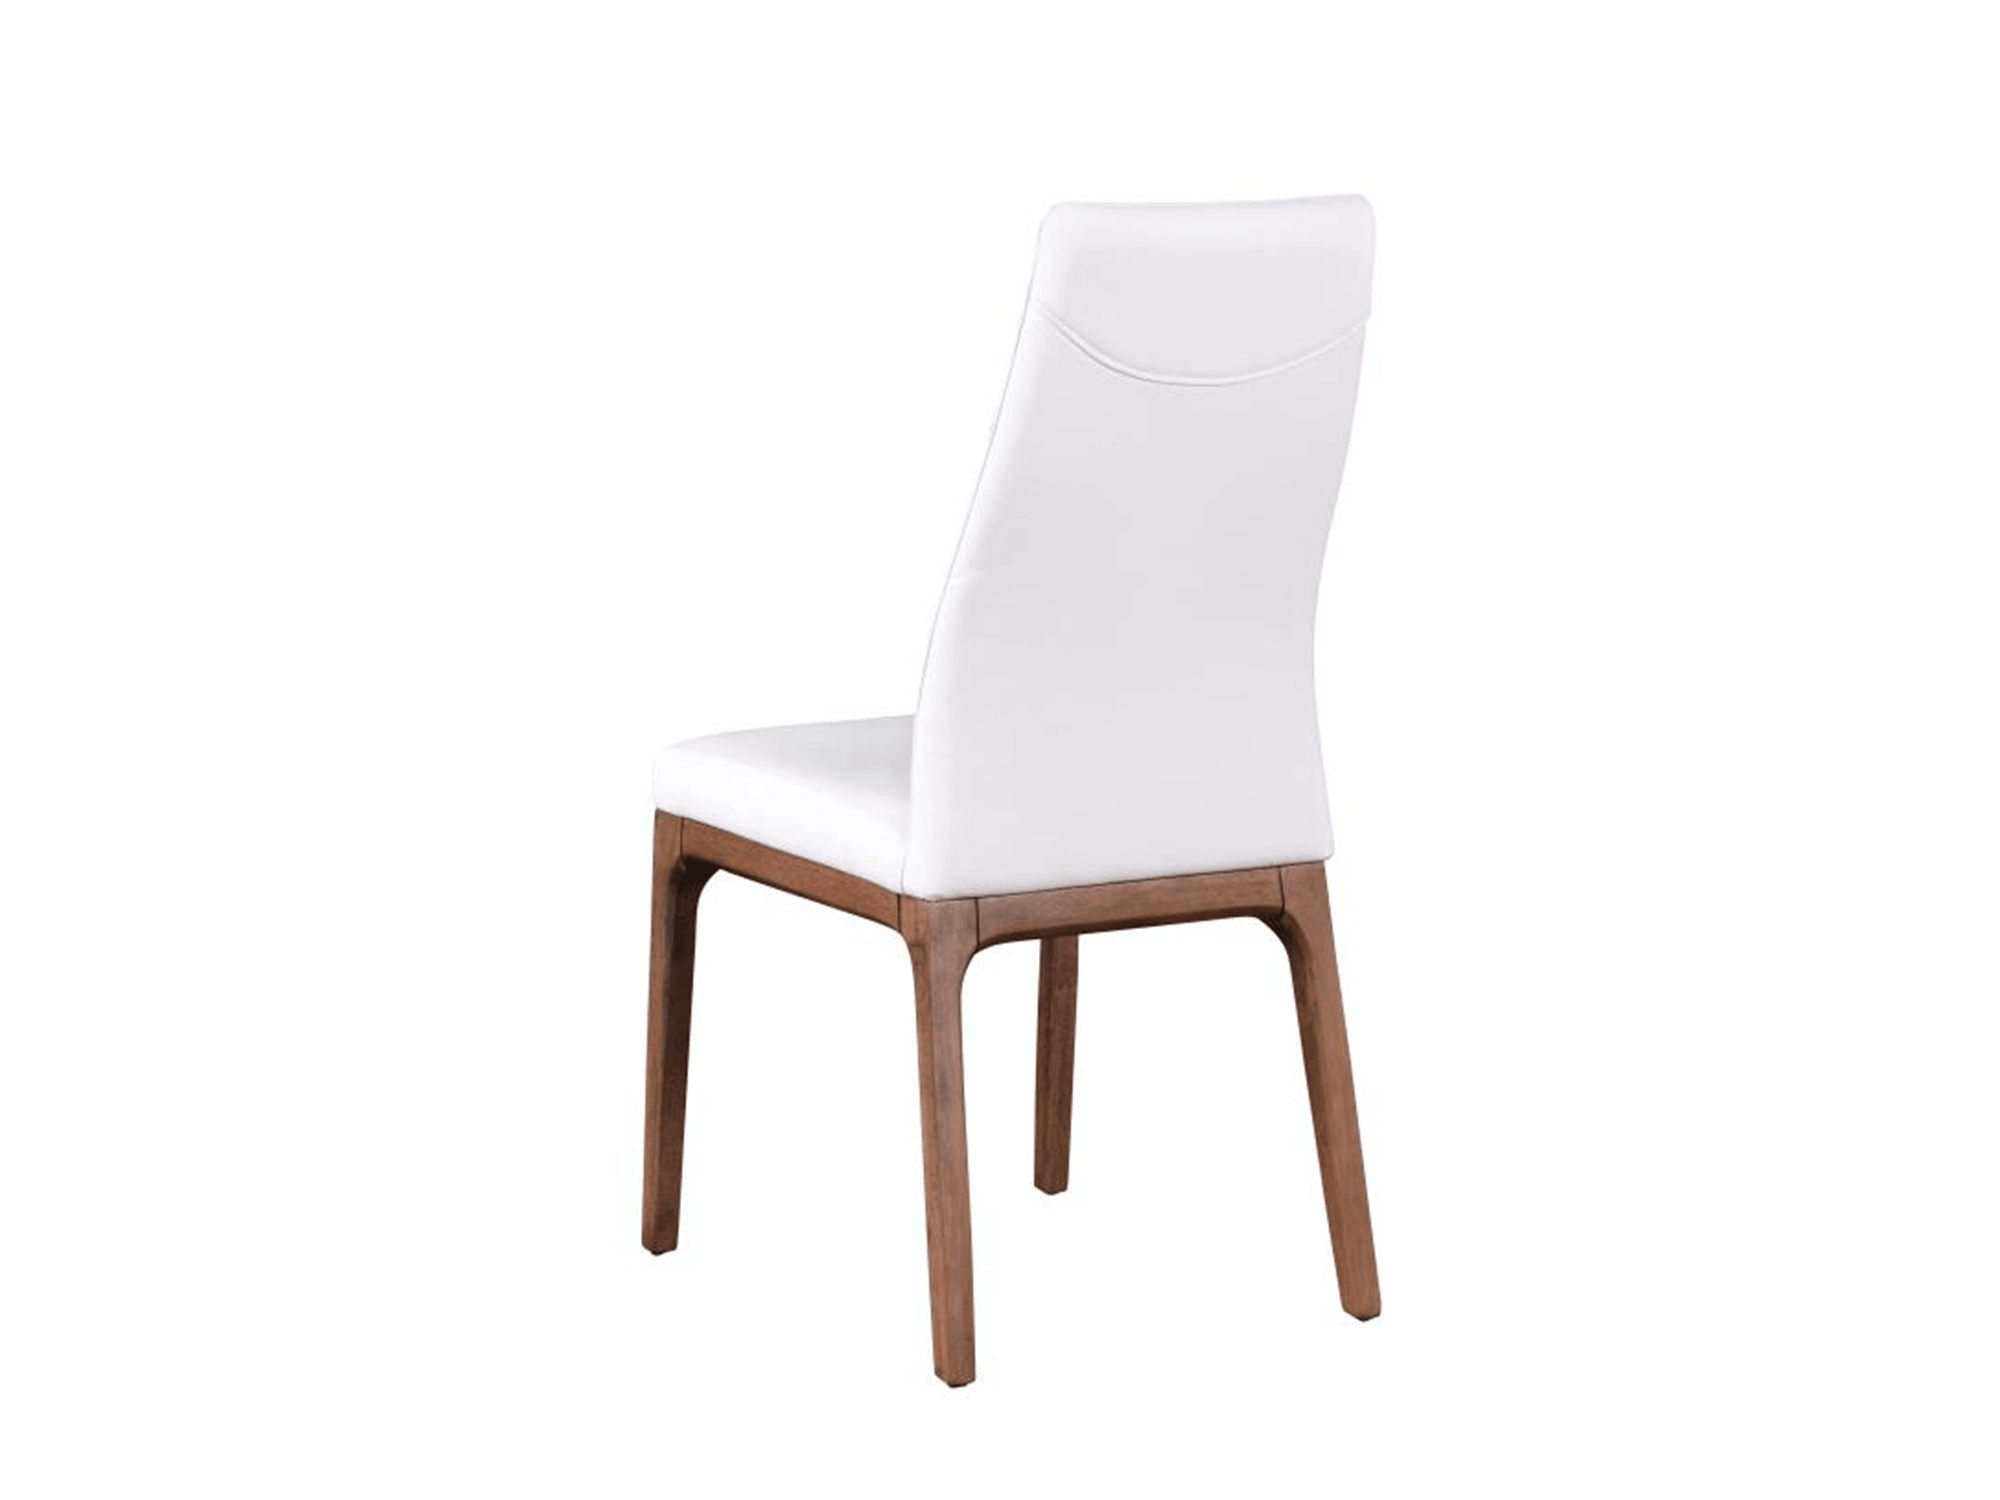 Emily Dining chair - Euro Living Furniture